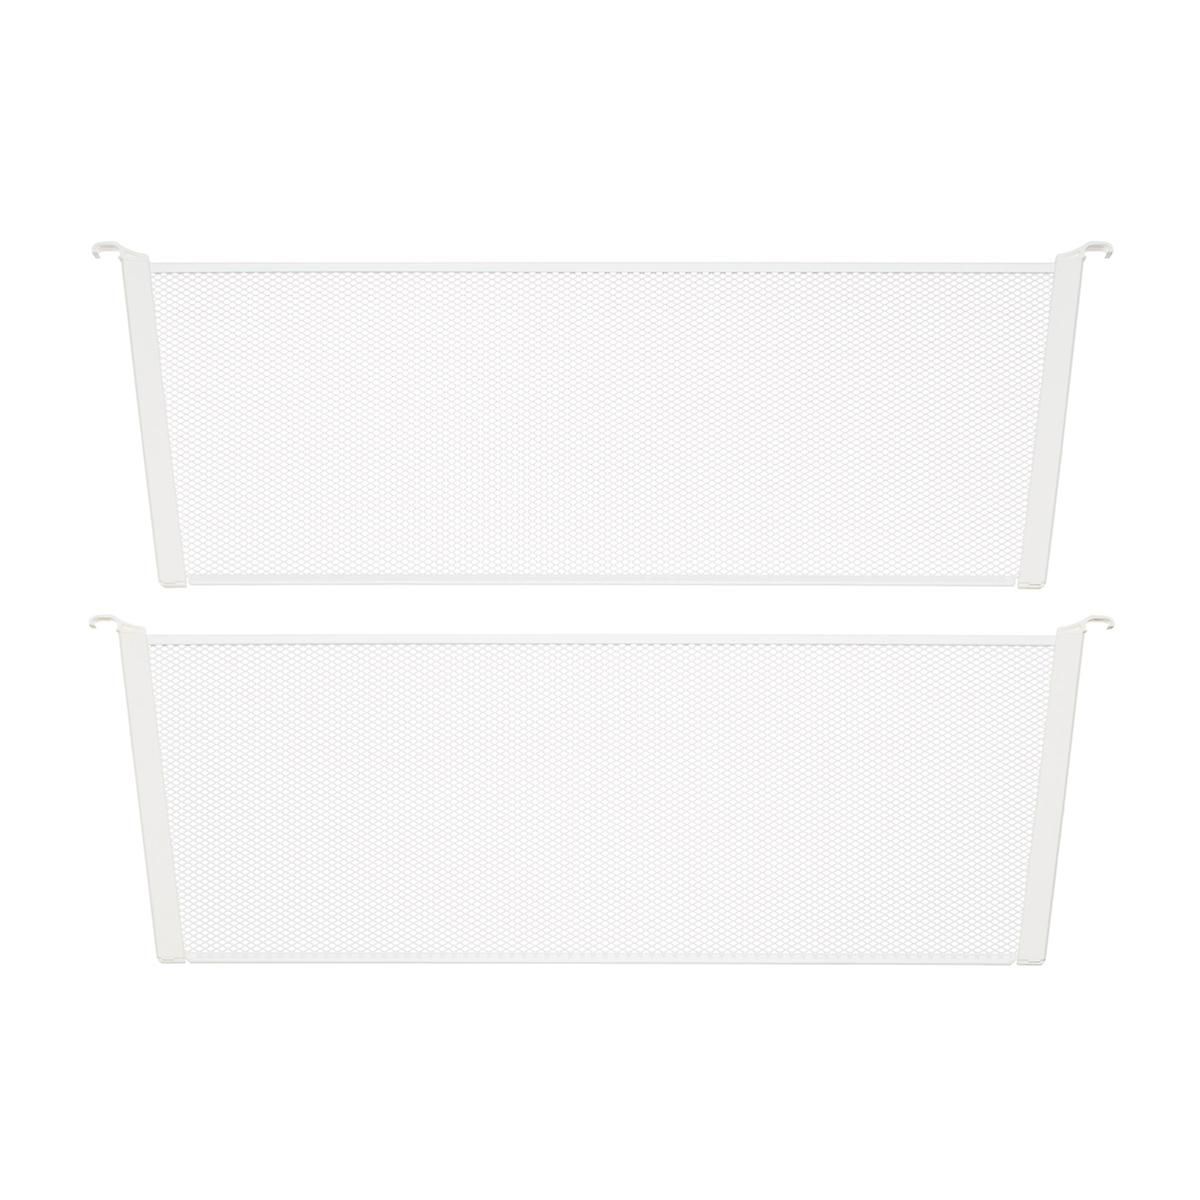 Elfa White 20-3/4" Mesh Drawer Dividers | The Container Store